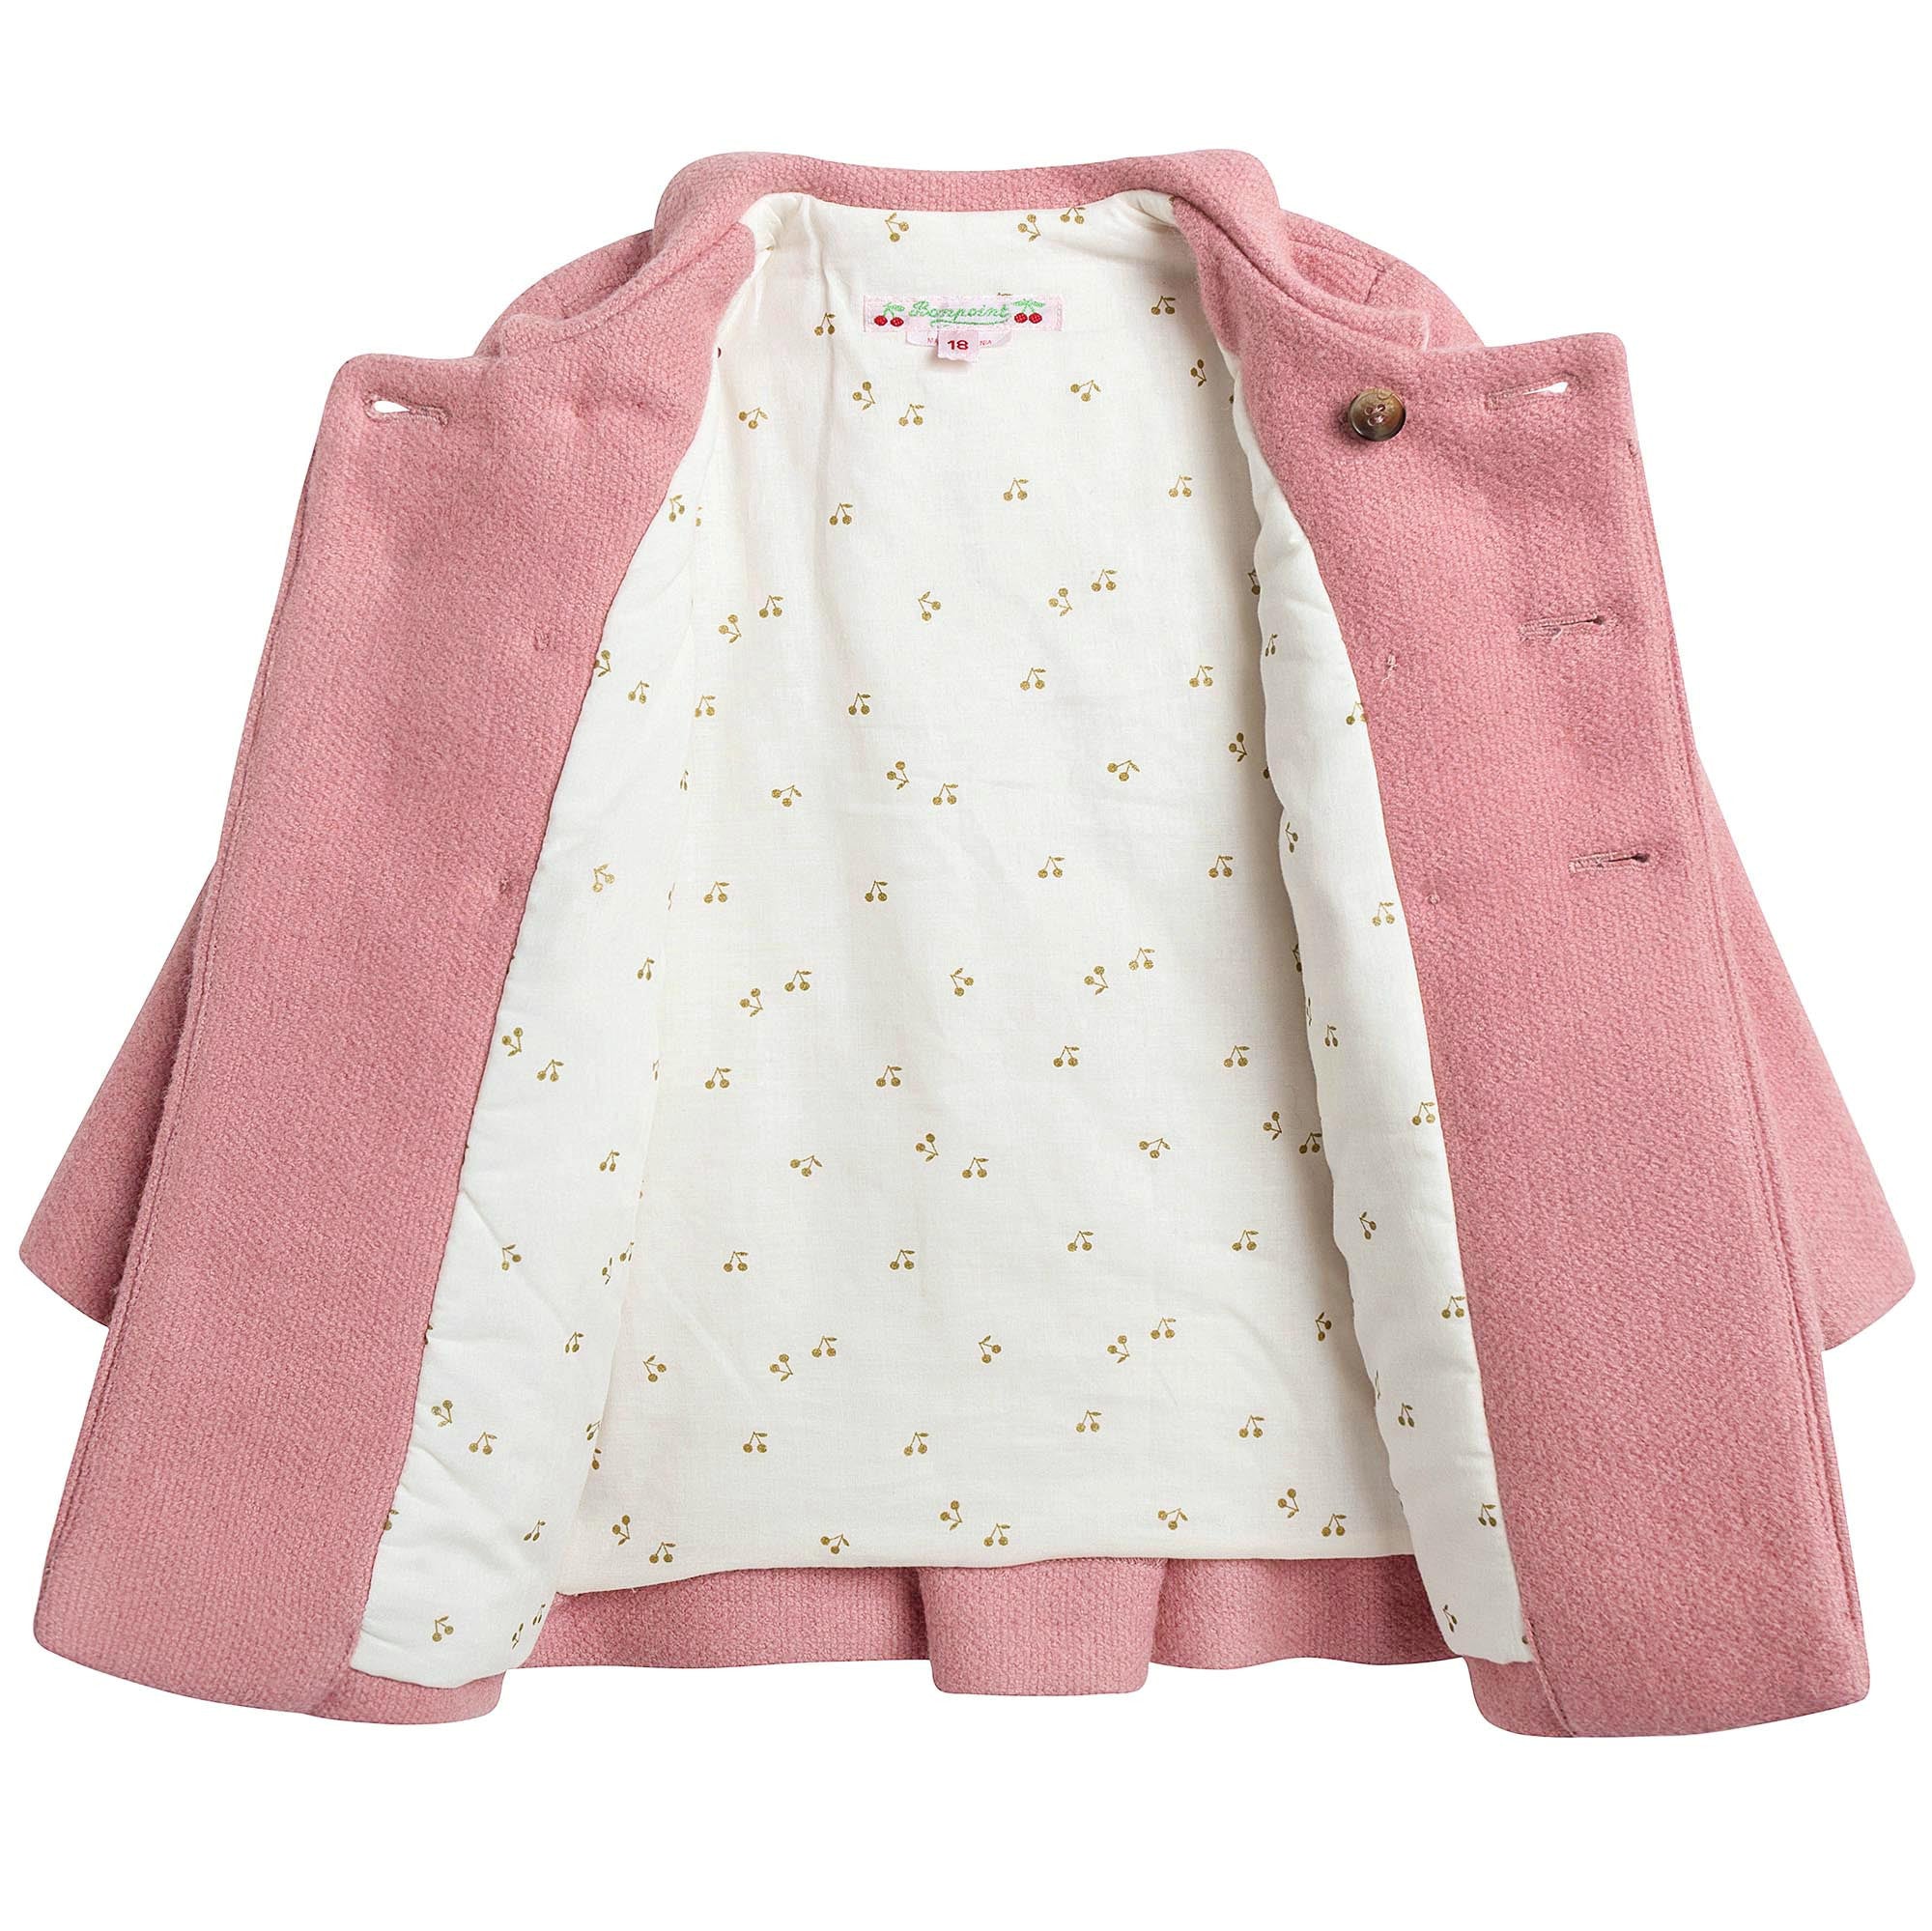 Baby Girls Pink With Gold Bottons Coat - CÉMAROSE | Children's Fashion Store - 3